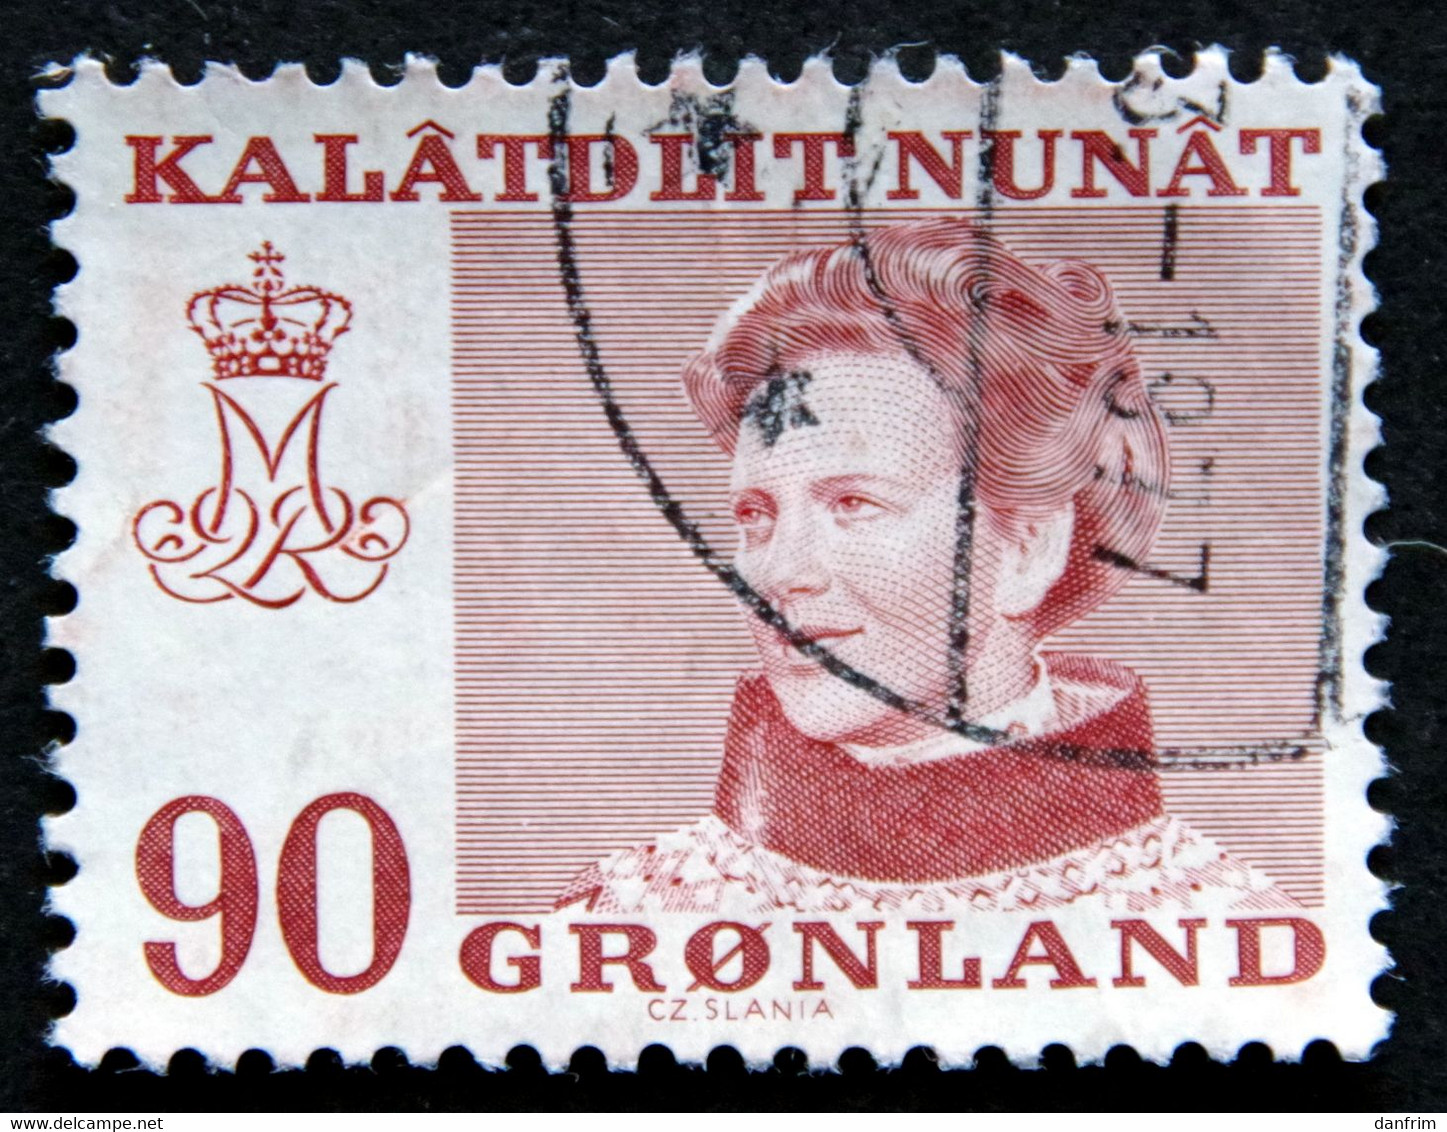 Greenland 1974  Queen Margrethe II   MiNr.90   ( Lot H 866  ) - Usados